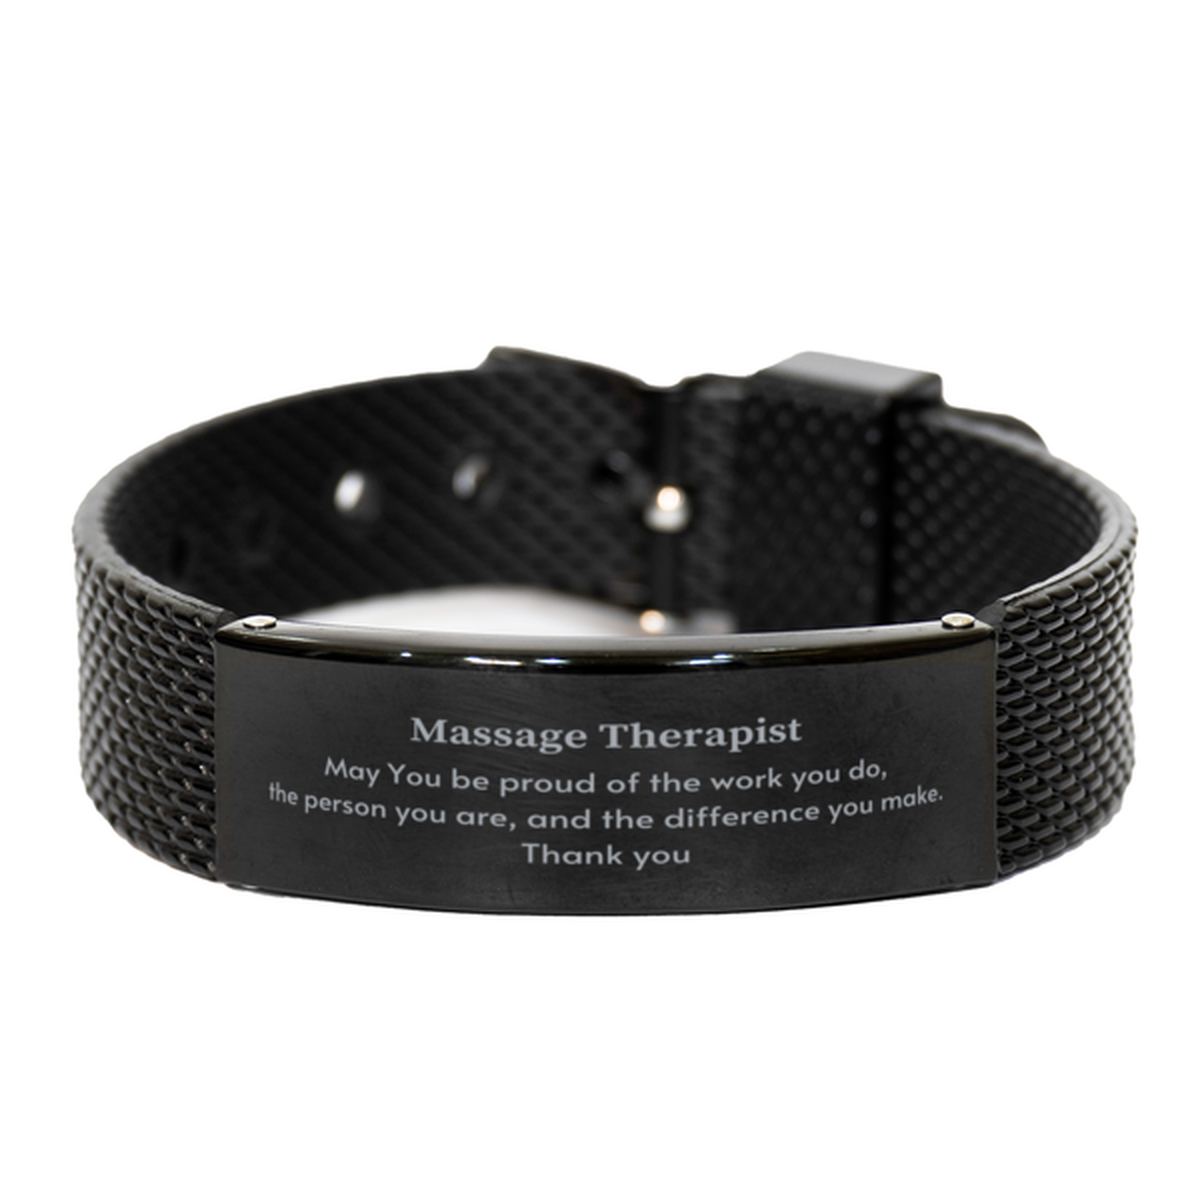 Heartwarming Black Shark Mesh Bracelet Retirement Coworkers Gifts for Massage Therapist, Massage Therapist May You be proud of the work you do, the person you are Gifts for Boss Men Women Friends